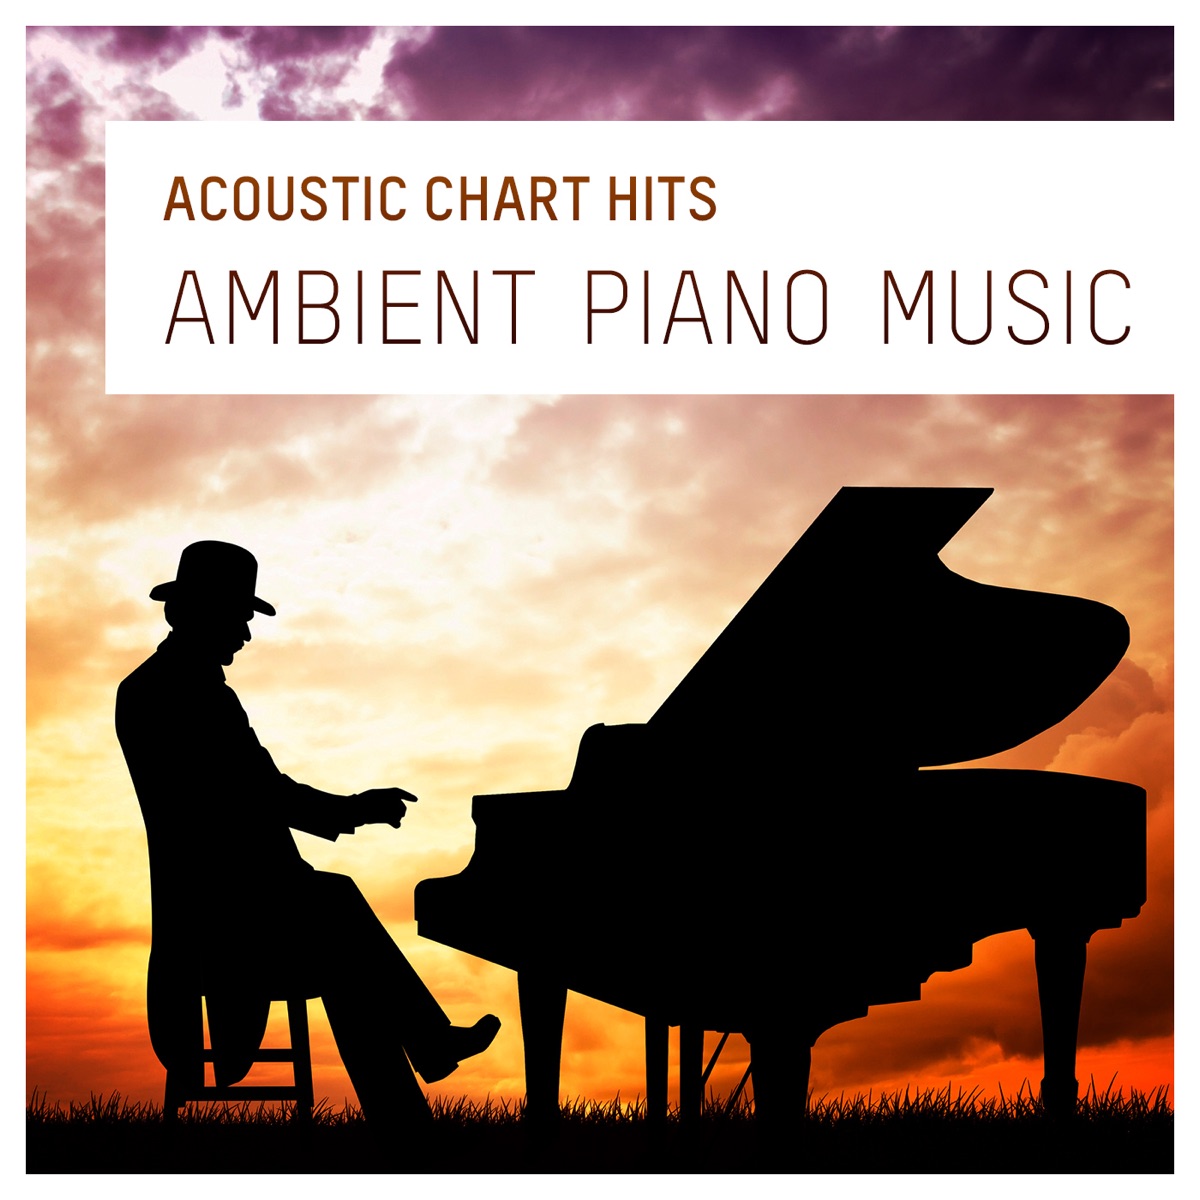 Acoustic Chart Hits (Ambient Piano Music) - Album by The Piano Man - Apple  Music